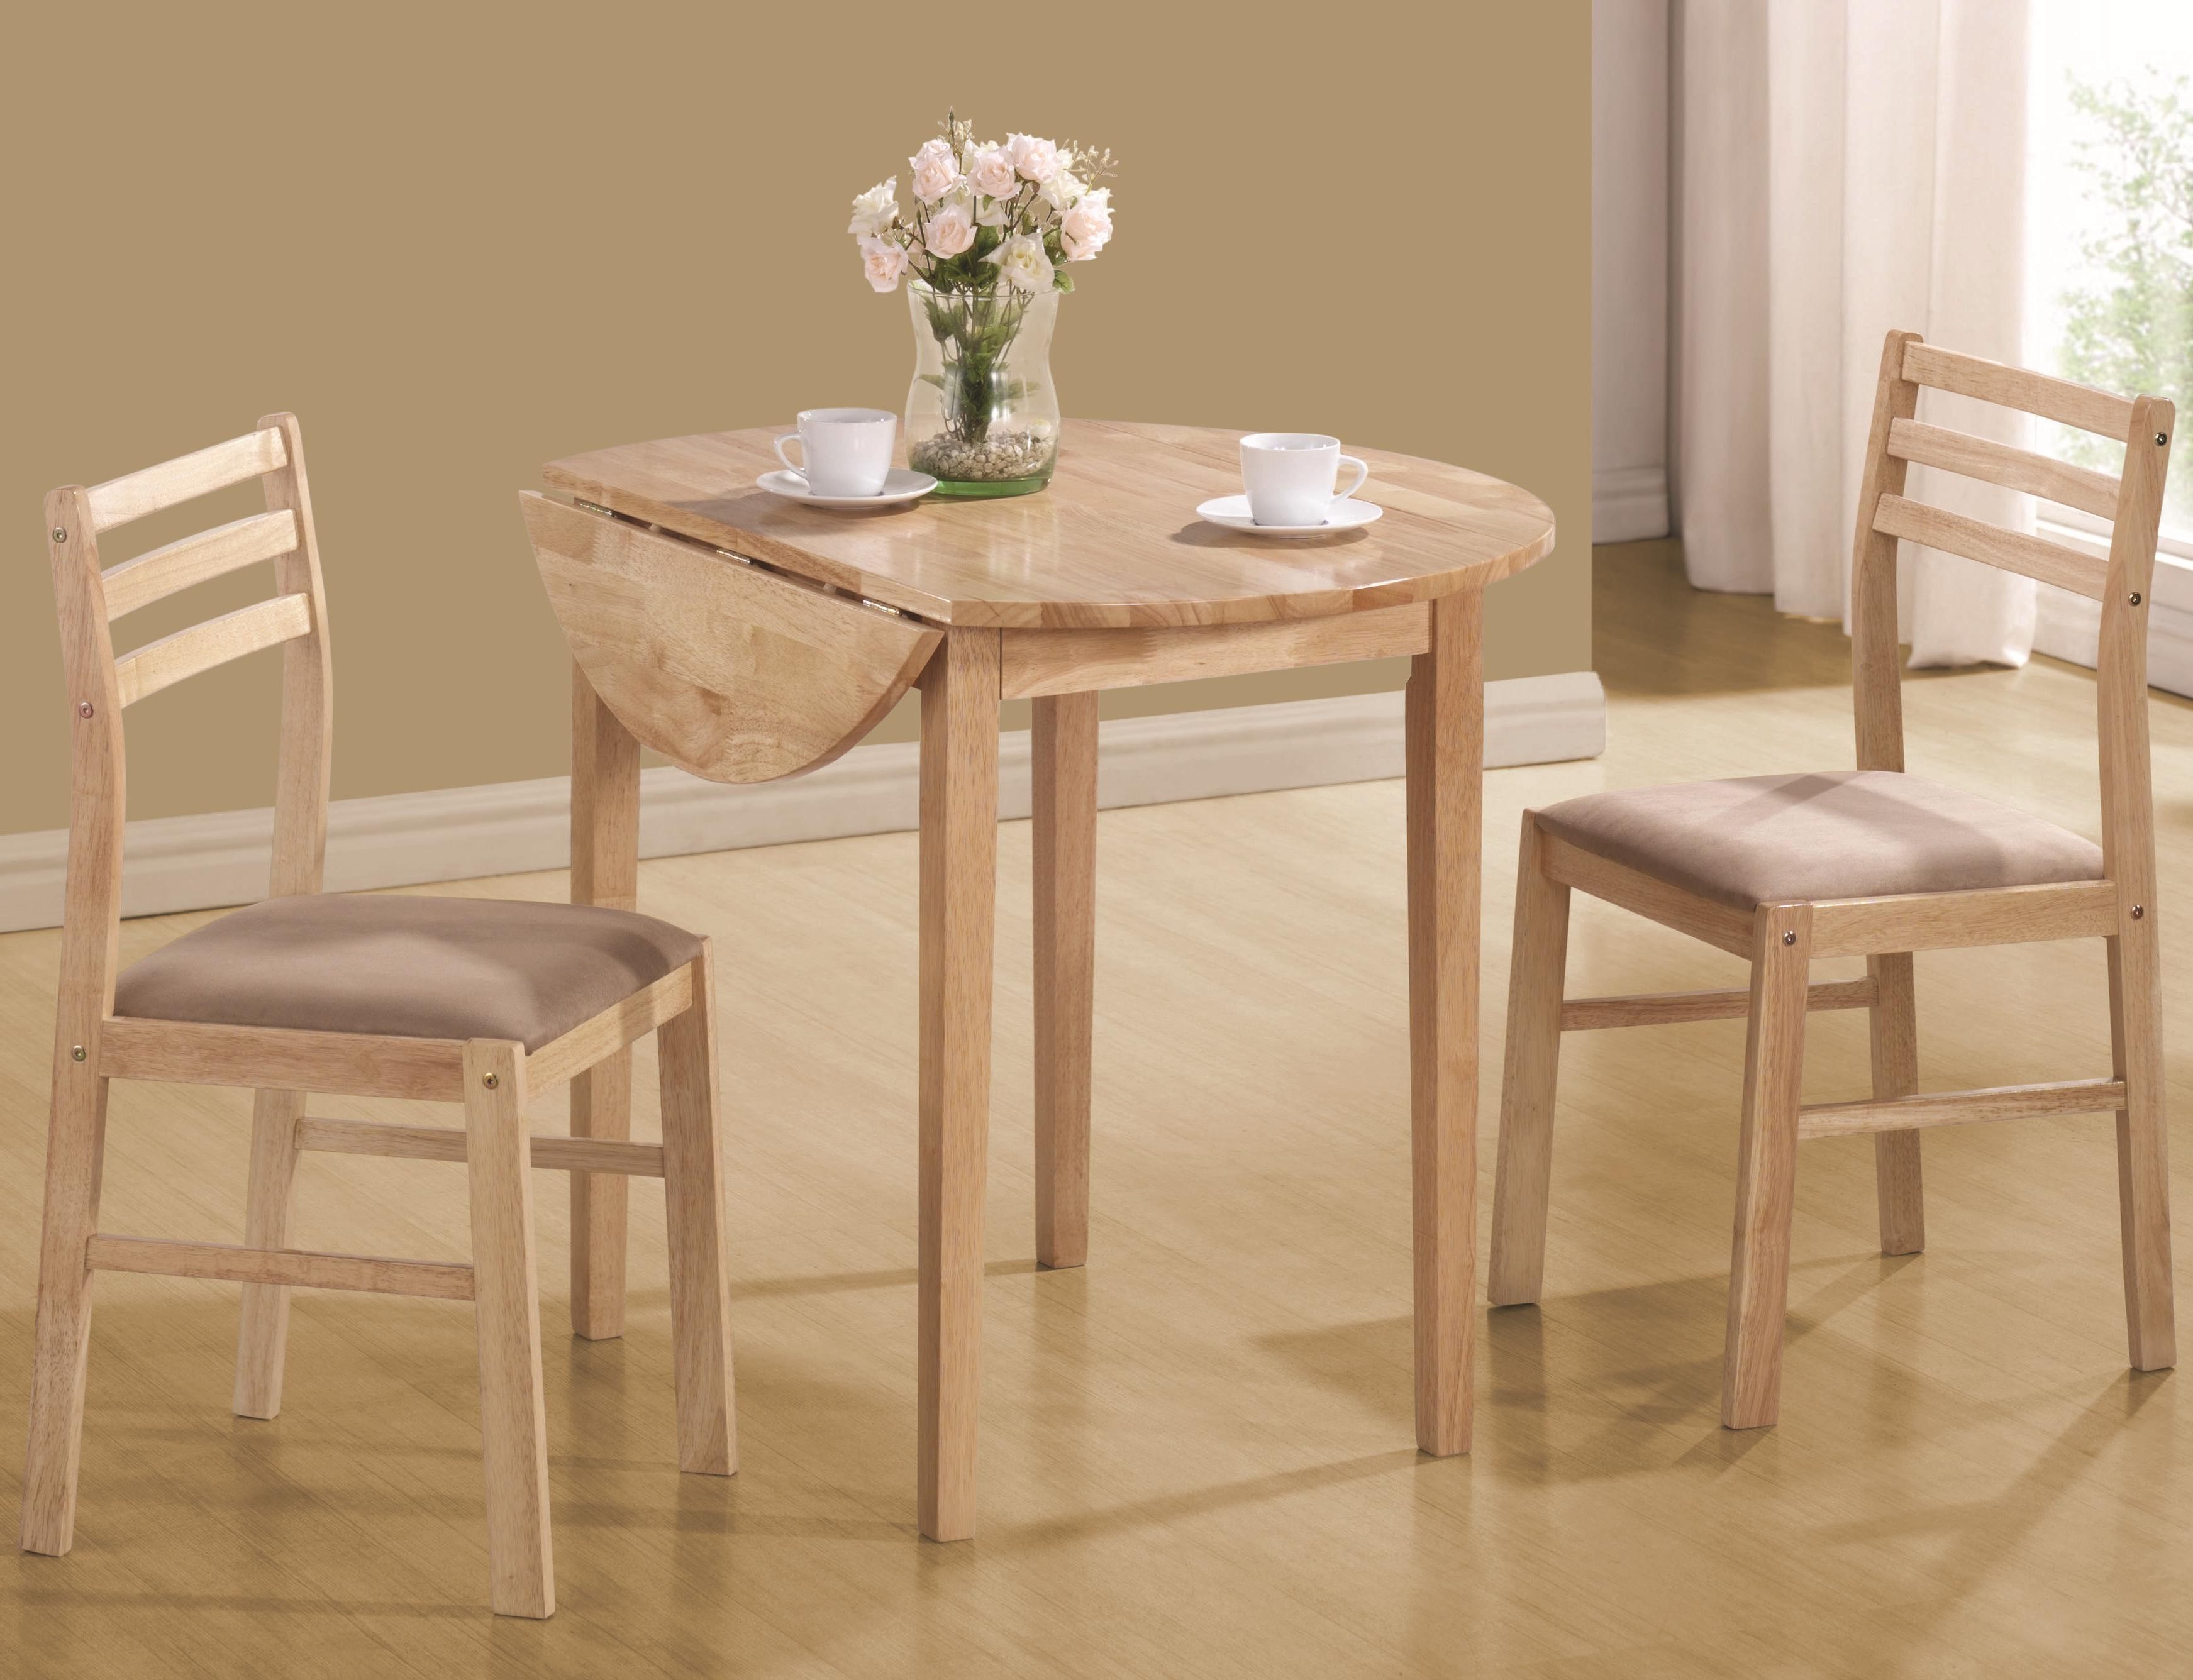 Dinettes Casual 3 Piece Table & Chair Setcoaster At Value City Furniture With Regard To Most Current 3 Piece Dining Sets (View 18 of 20)